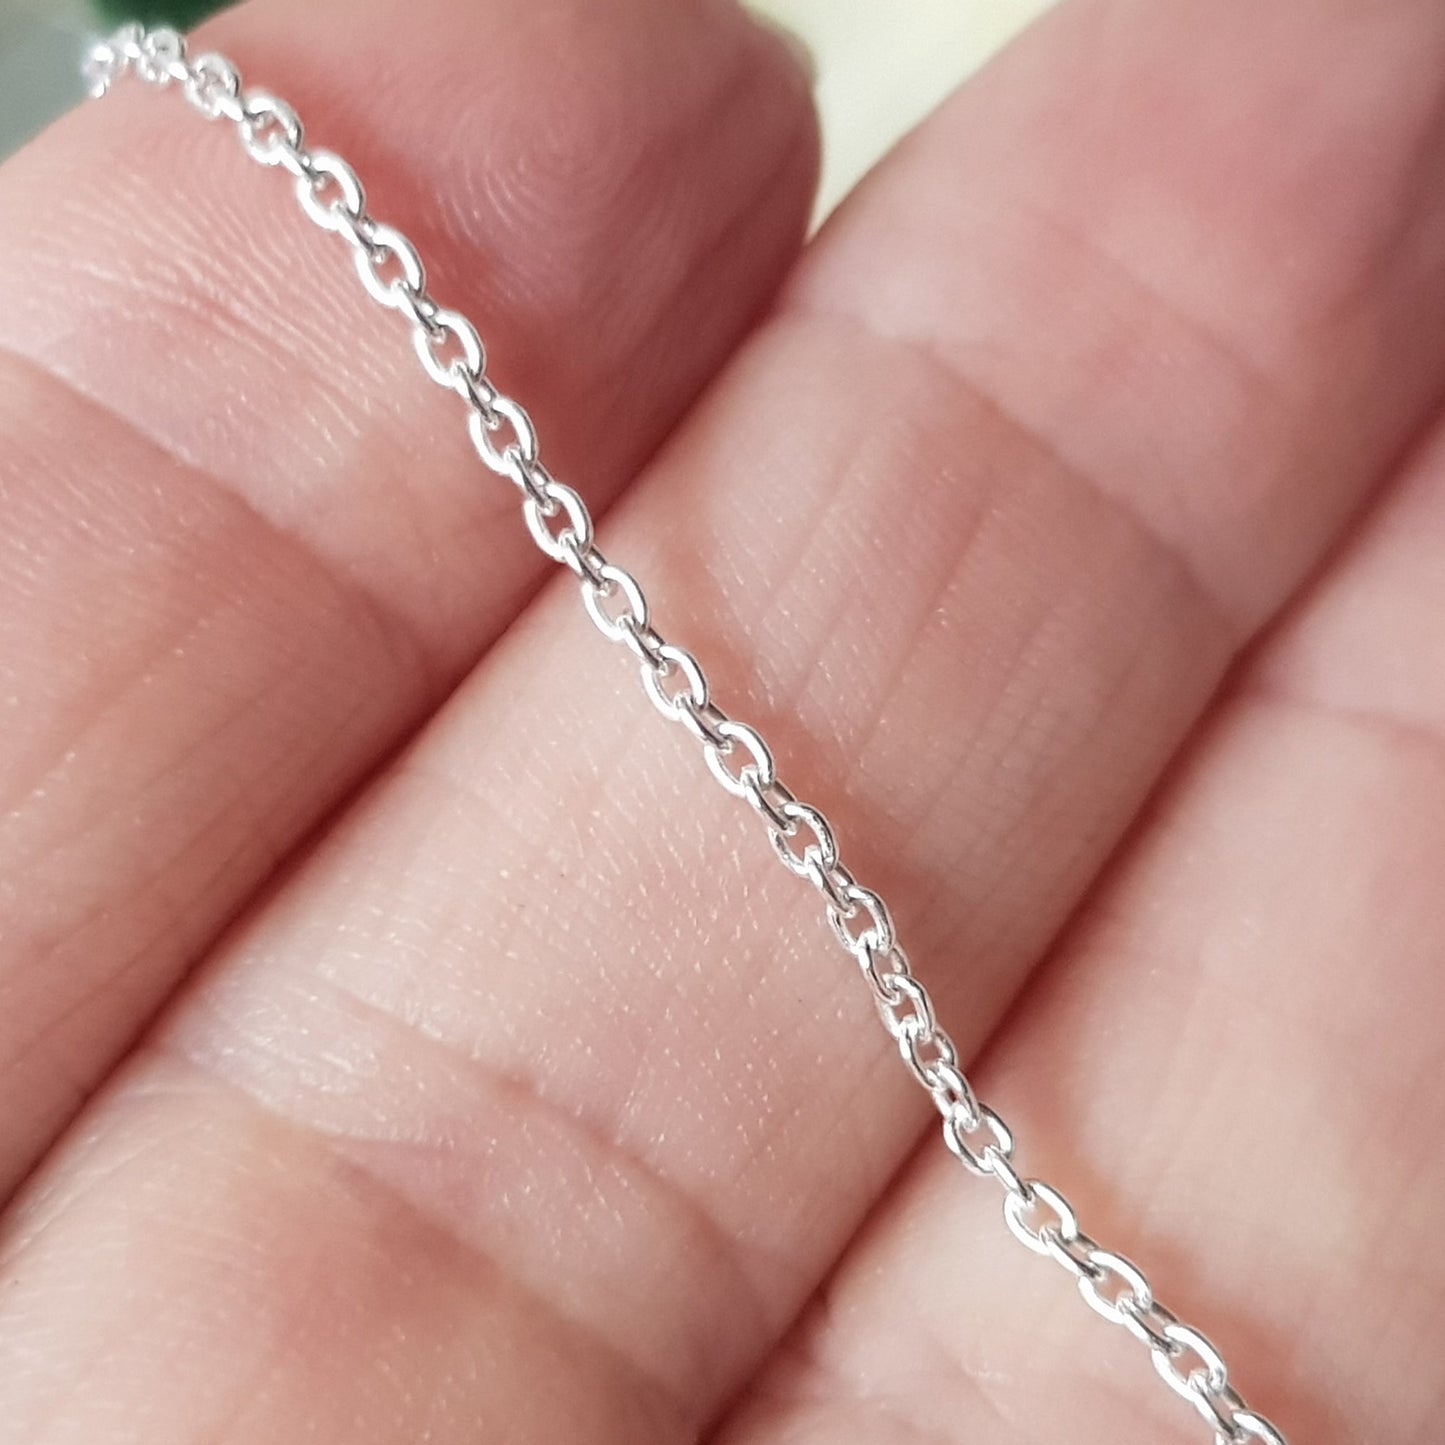 Chains - Close Cable Chain Genuine Sterling Silver Finished | SS-FChainCC | Jewellery Making Supply